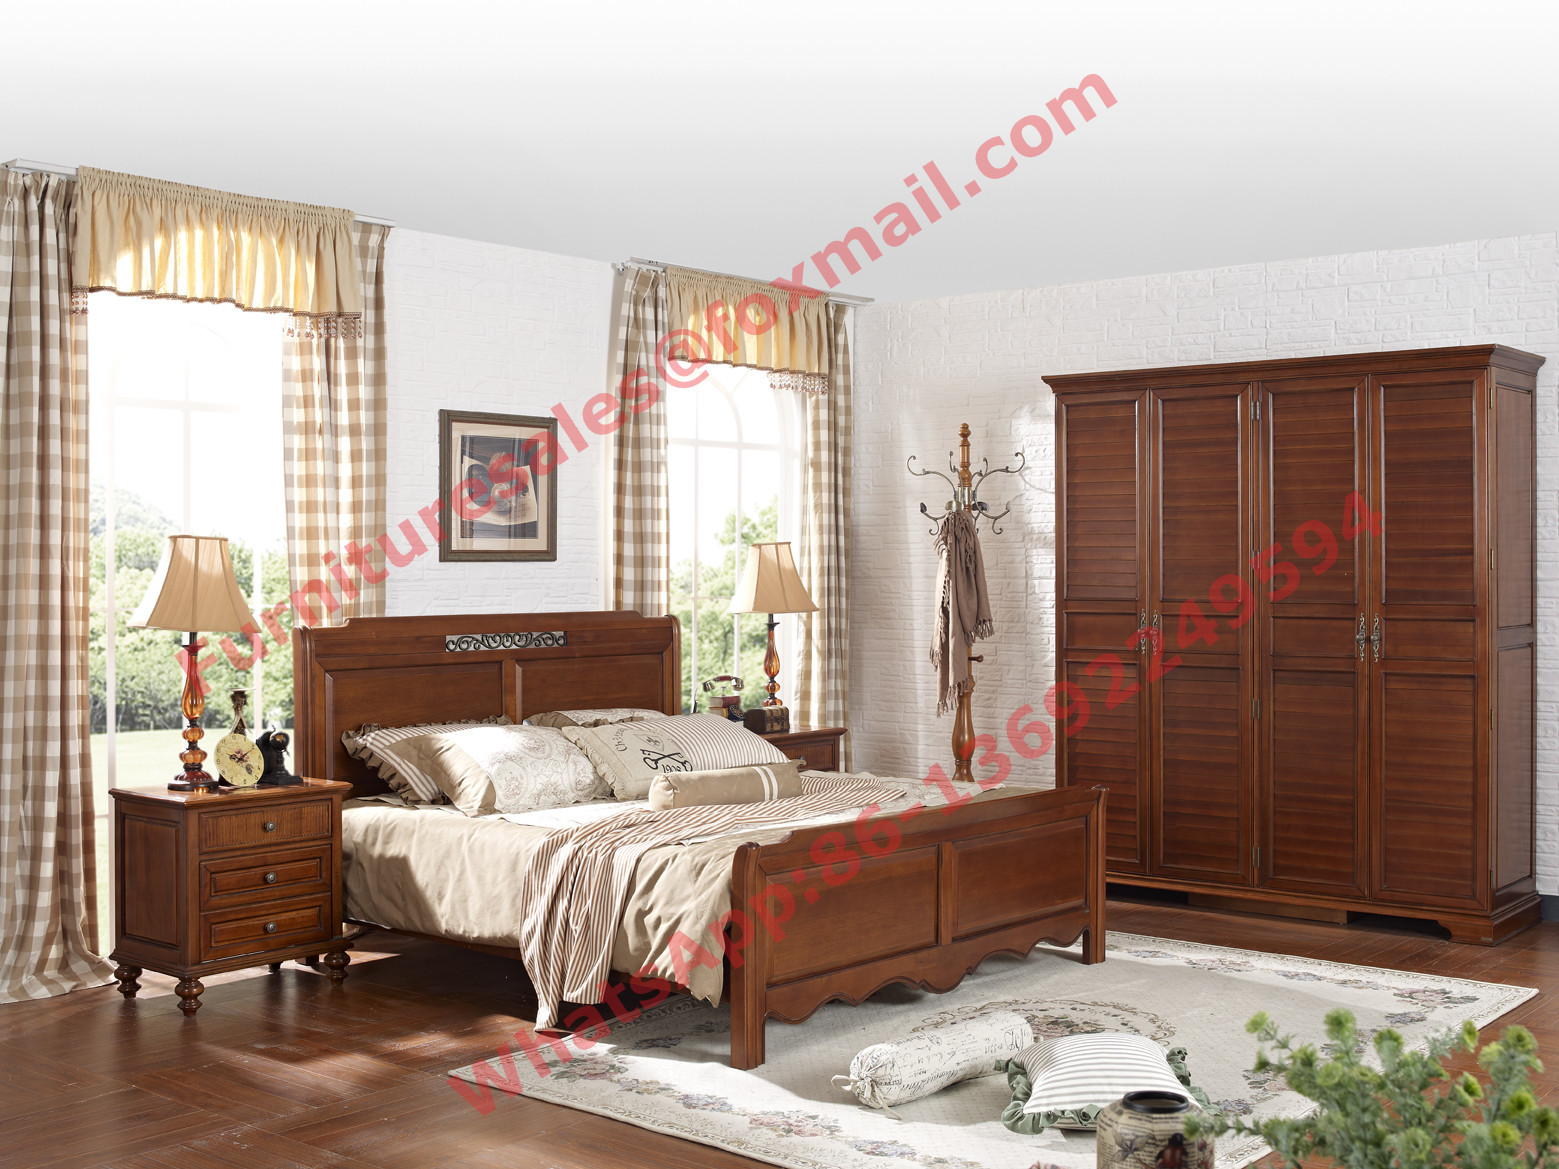  English Country Style Solid Wood Bed in Wooden Bedroom Furniture sets Manufactures